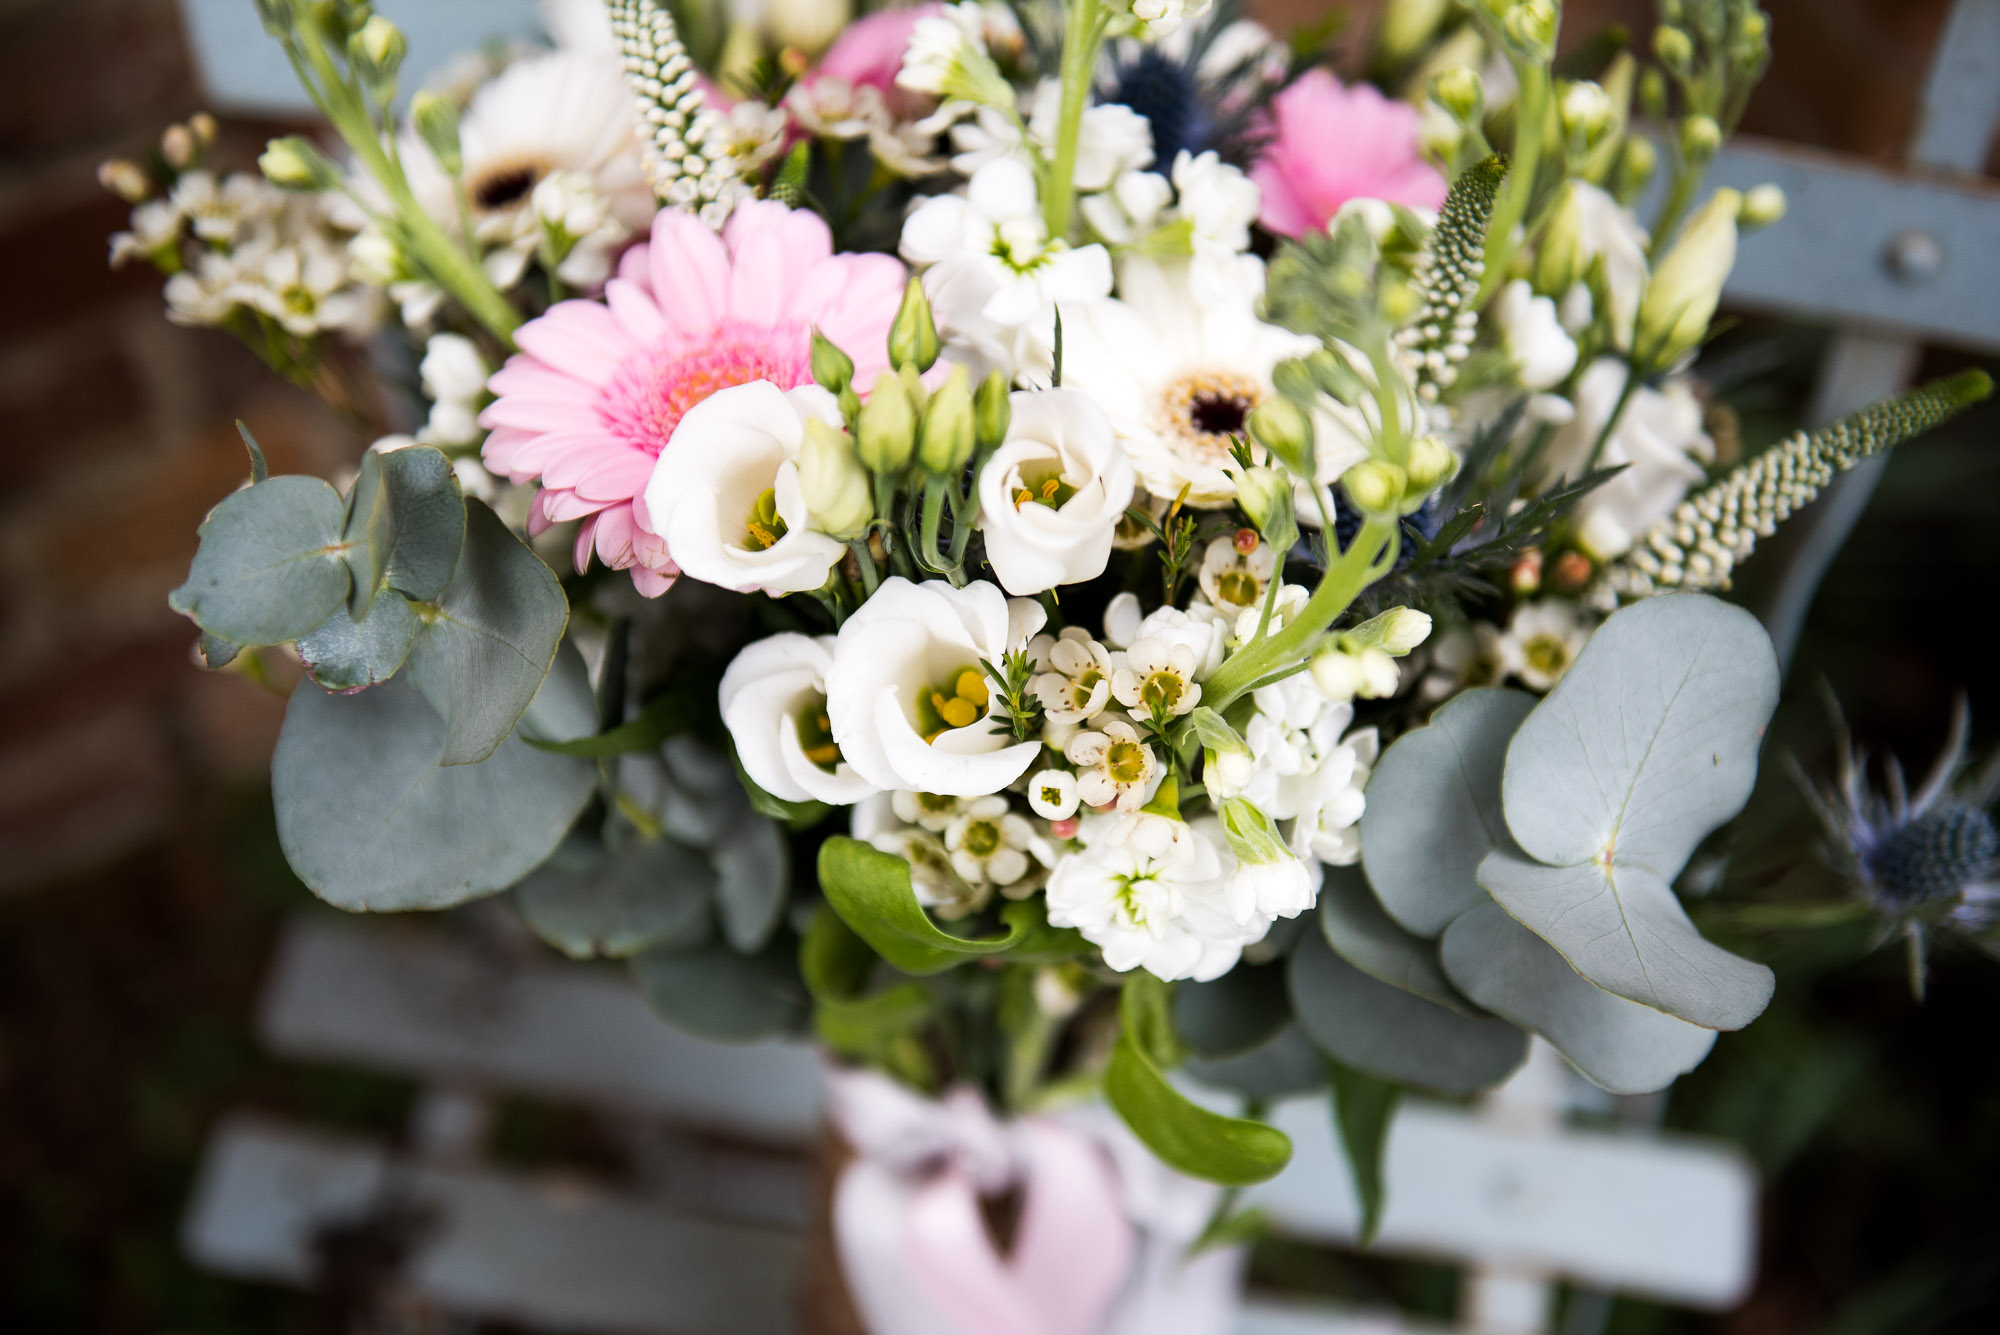 Bridal bouquet with eucalyptus and white flowers